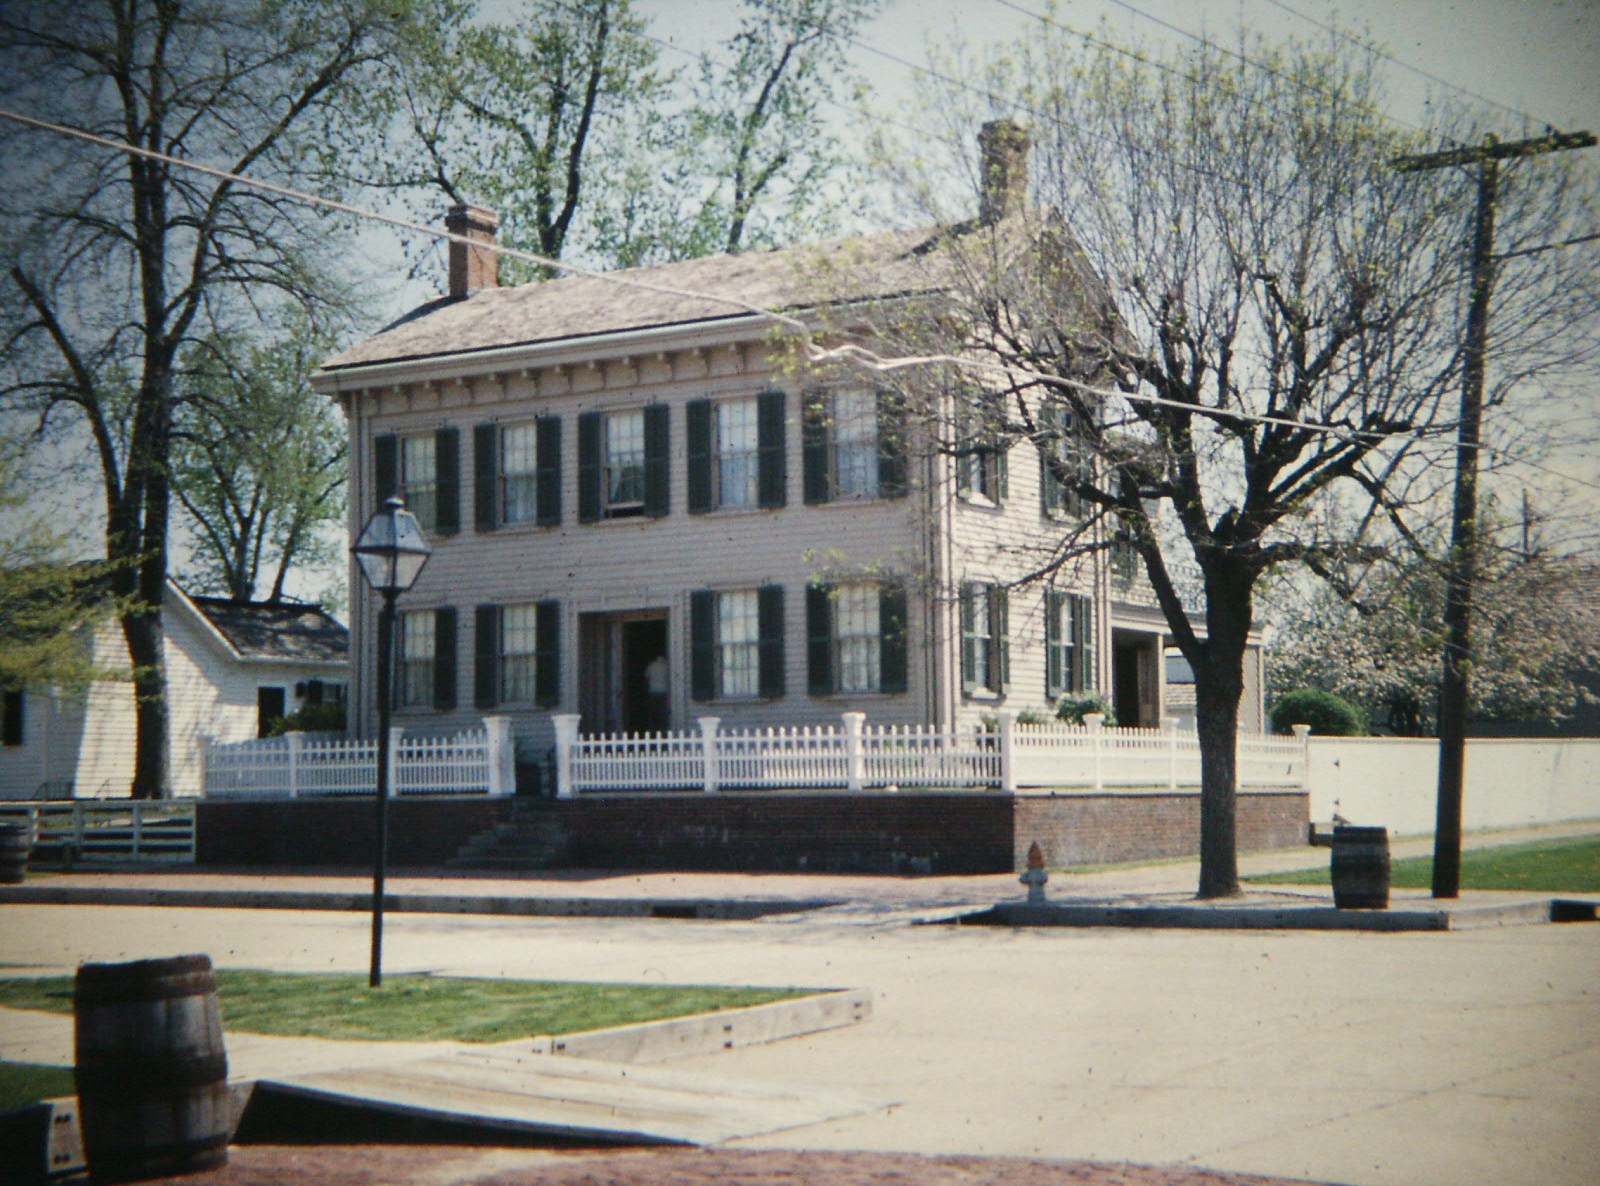 Abraham Lincoln home in Springfield, Illinois